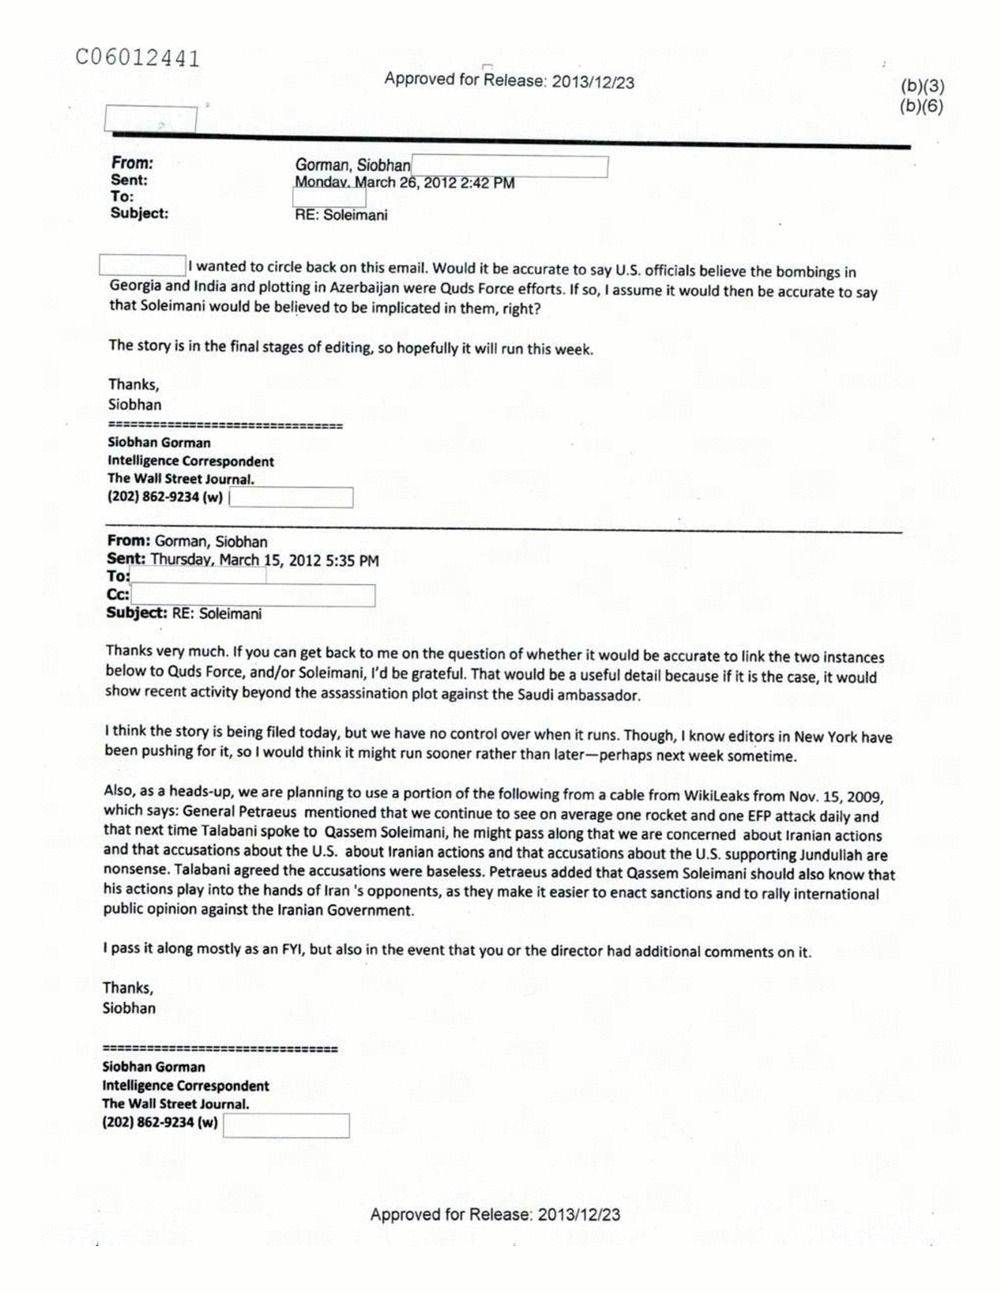 Page 25 from Email Correspondence Between Reporters and CIA Flacks